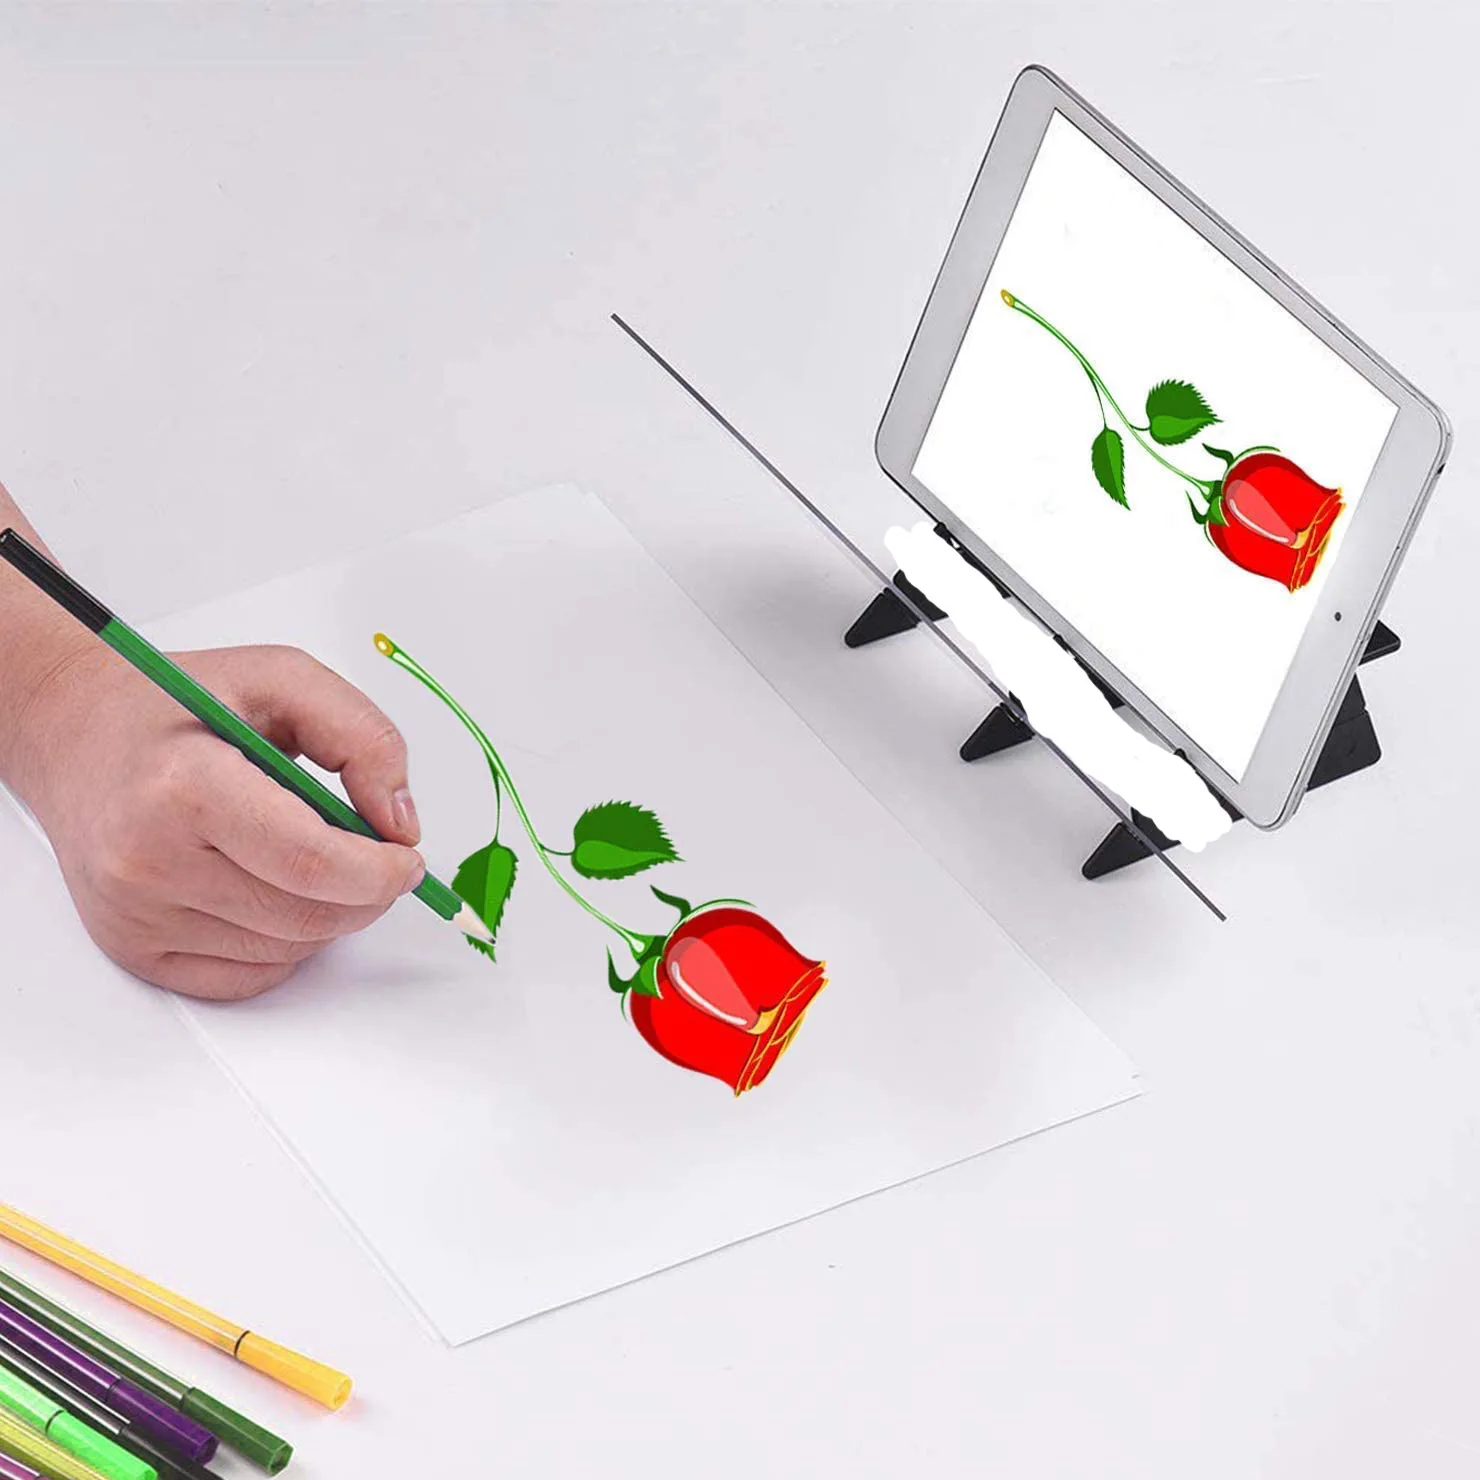 Drawing Painting Sketch Optical Mirror Reflection Projection Tracing Plate  Board Portable Optical Tracing Board Image Projector Optical Painting Board